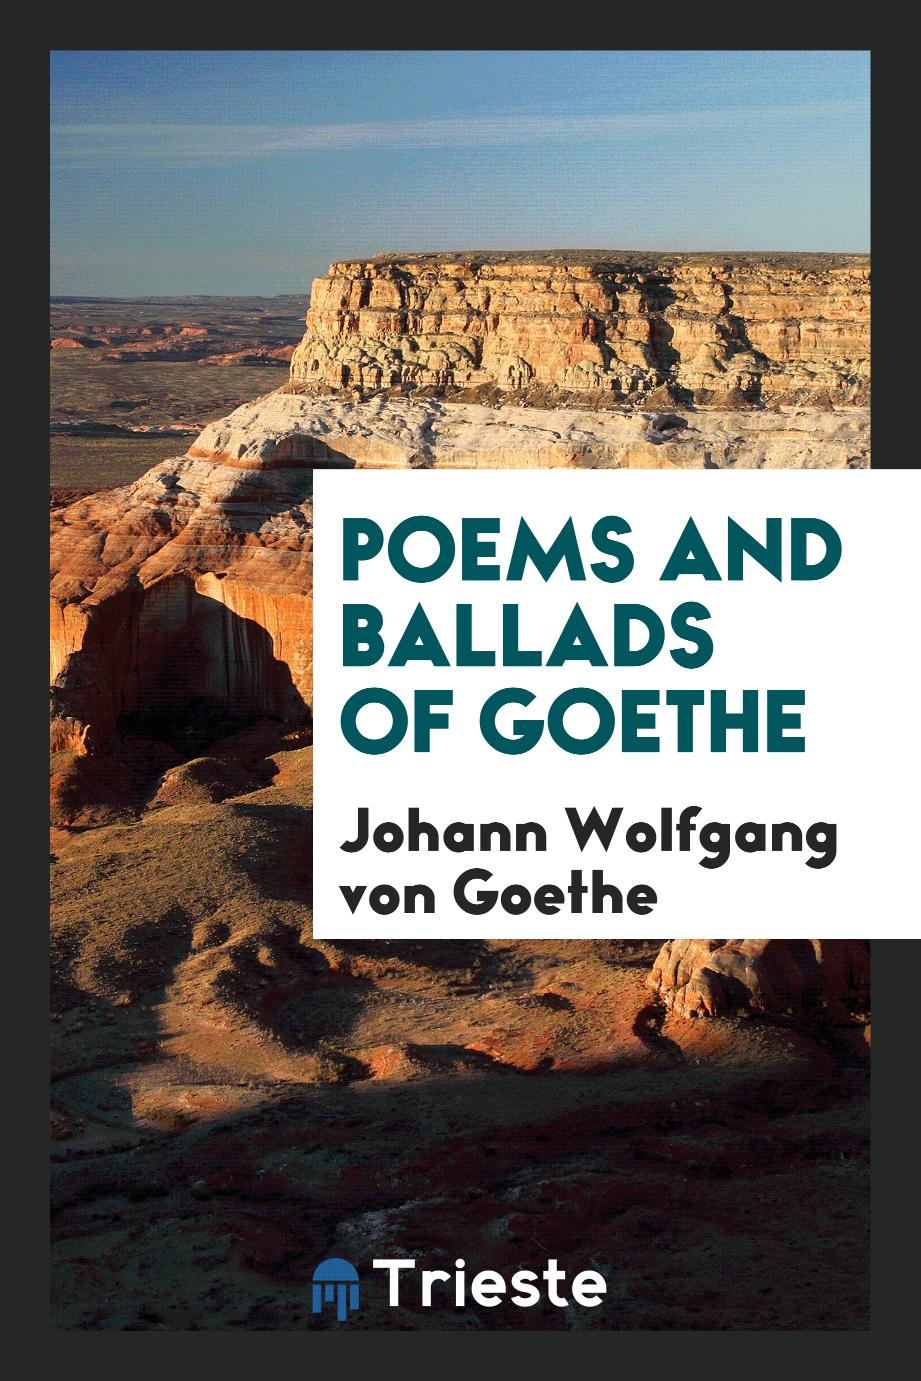 Poems and ballads of Goethe